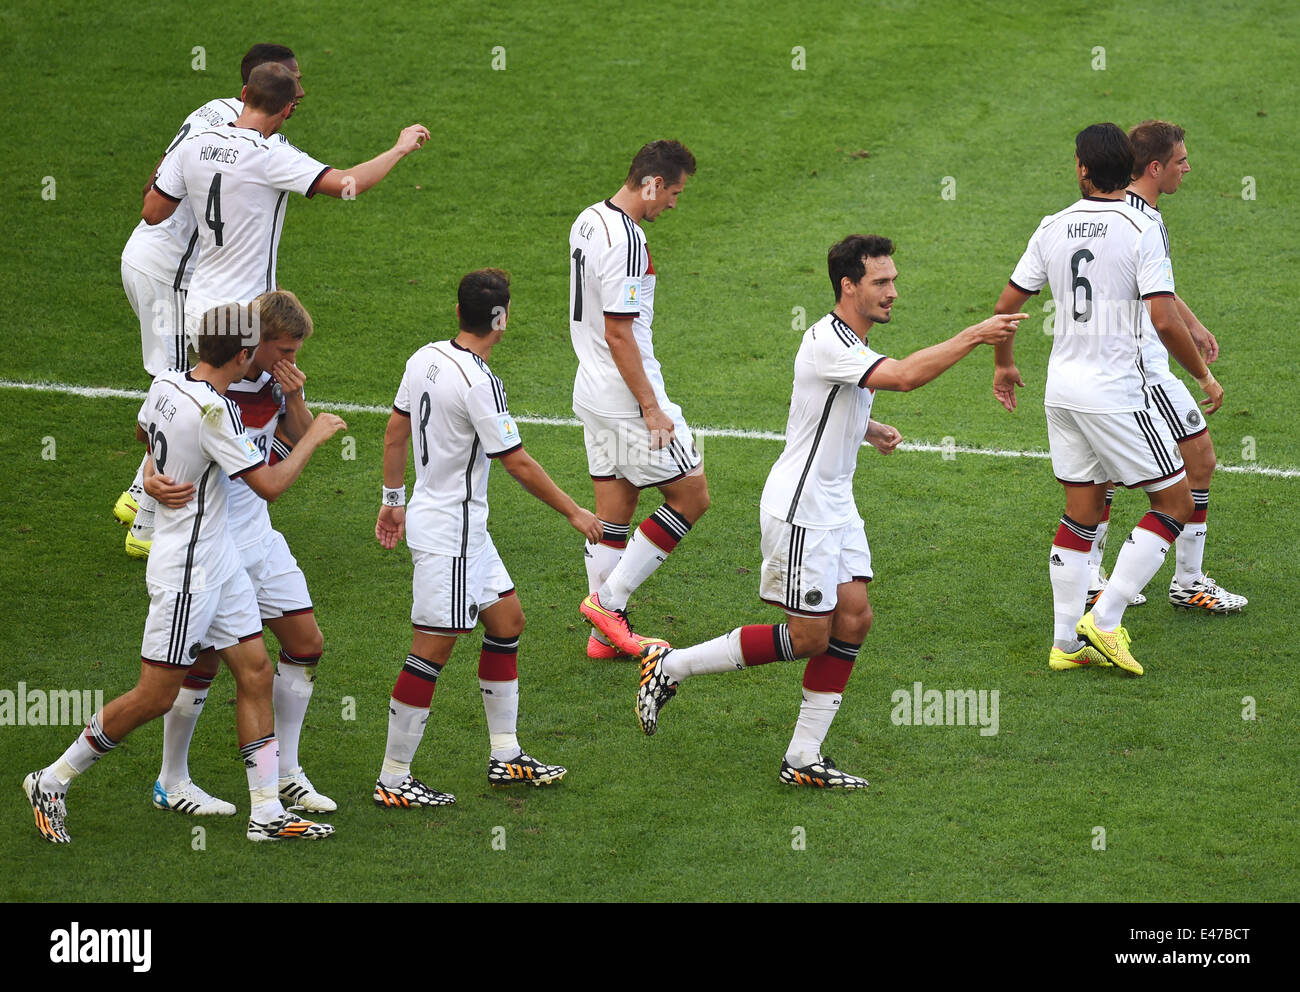 Rio de Janeiro, Brazil. 04th July, 2014. Mats Hummels (3-R) of Germany celebrates with team mates after scoring 0-1 goal during the FIFA World Cup 2014 quarter final soccer match between France and Germany at Estadio do Maracana in Rio de Janeiro, Brazil, 04 July 2014. Photo: Marcus Brandt/dpa/Alamy Live News Stock Photo